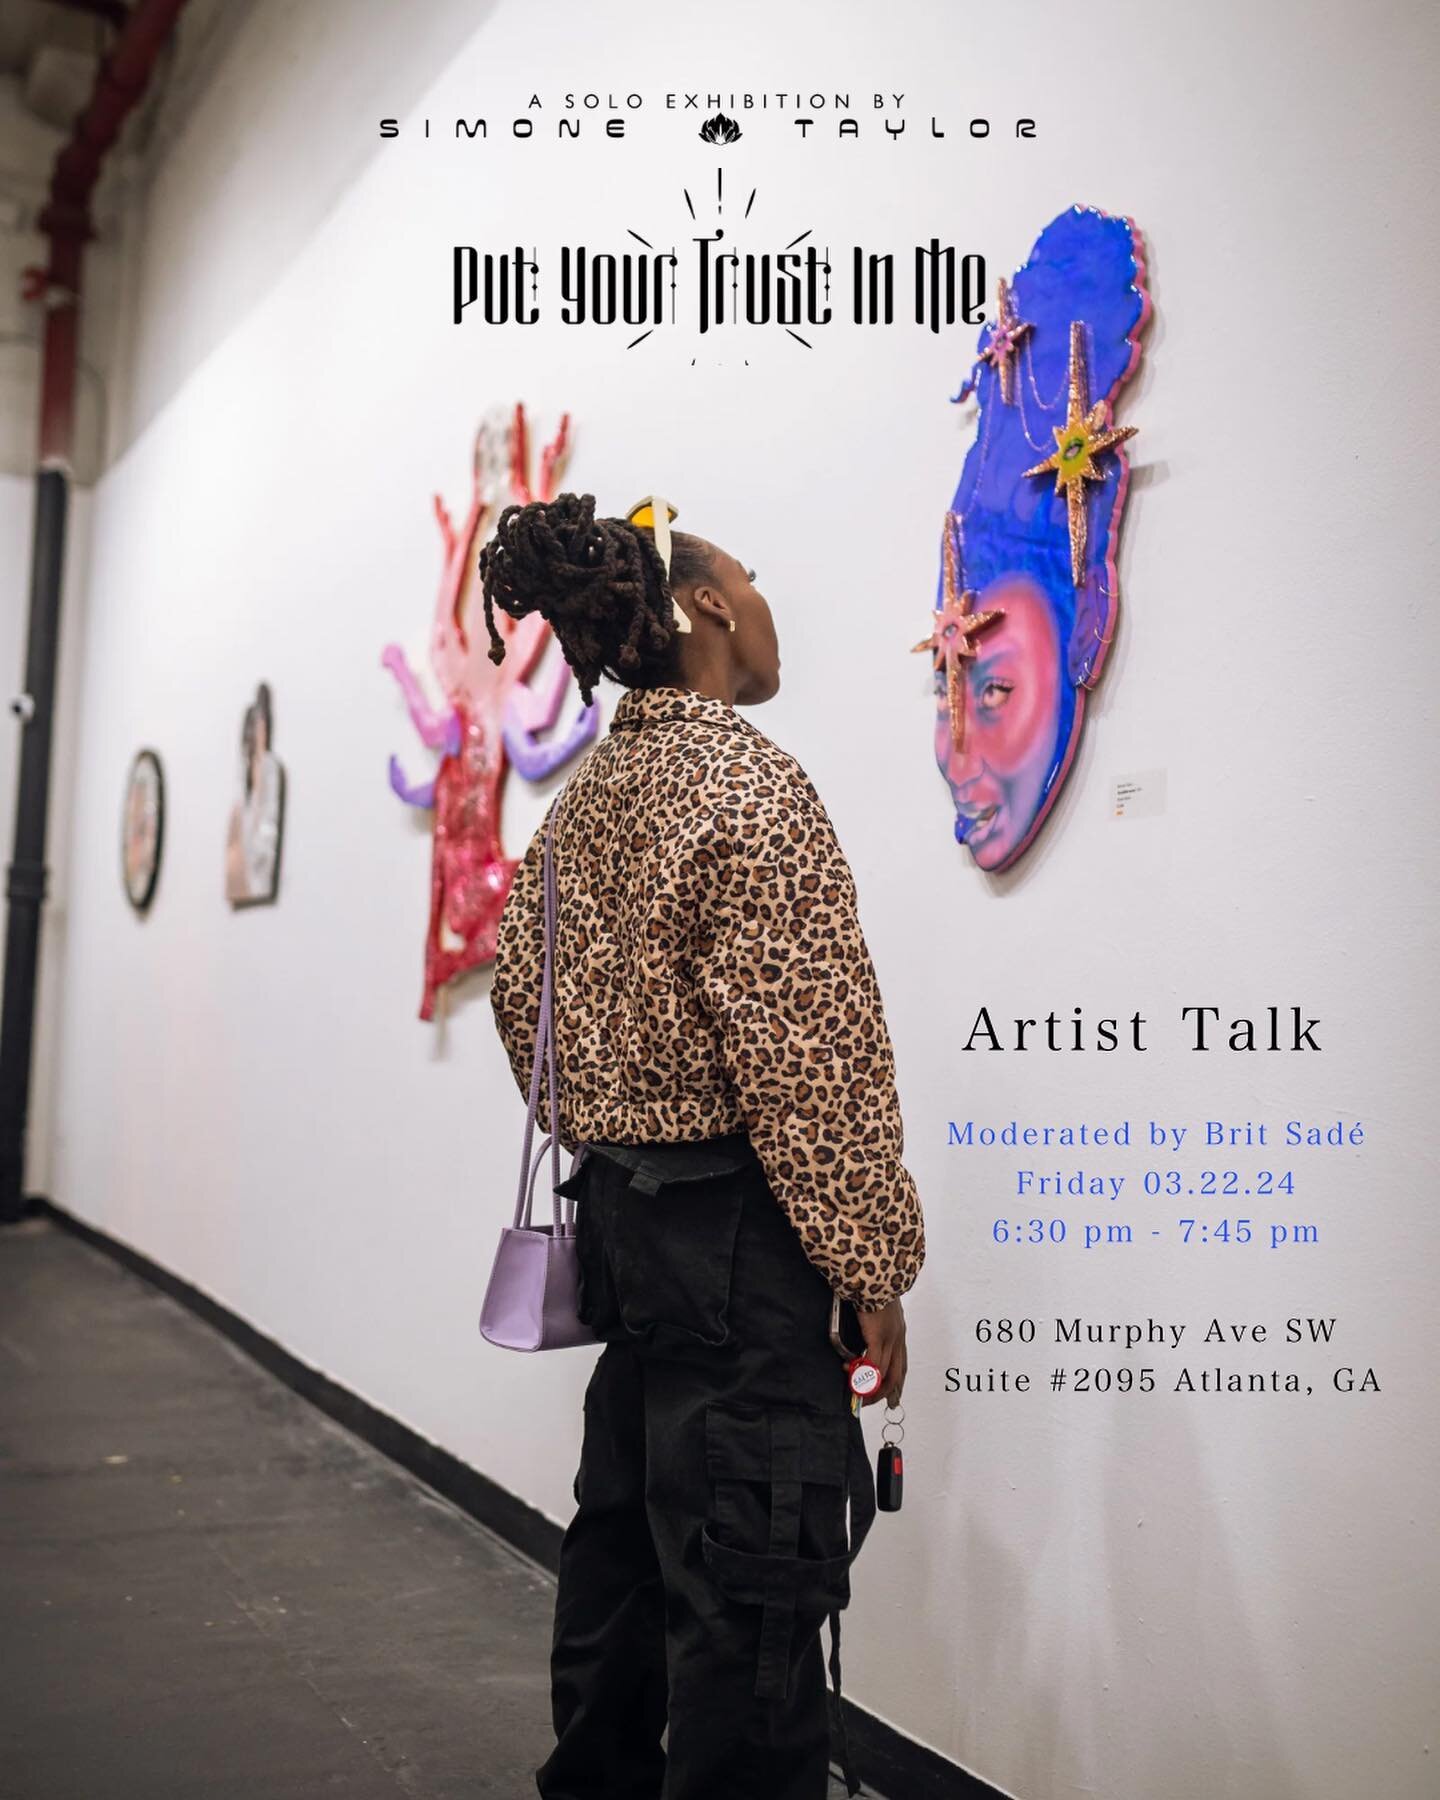 Join us Friday March 22nd from 6:30 pm-7:45 pm for  @simone222taylor&rsquo;s Artist Talk for the &ldquo;Put Your Trust in Me&rdquo; exhibition on display until March 31. RSVP recommended, link in BIO. 

Moderator: @iambritsade 
Our gallery hours are 